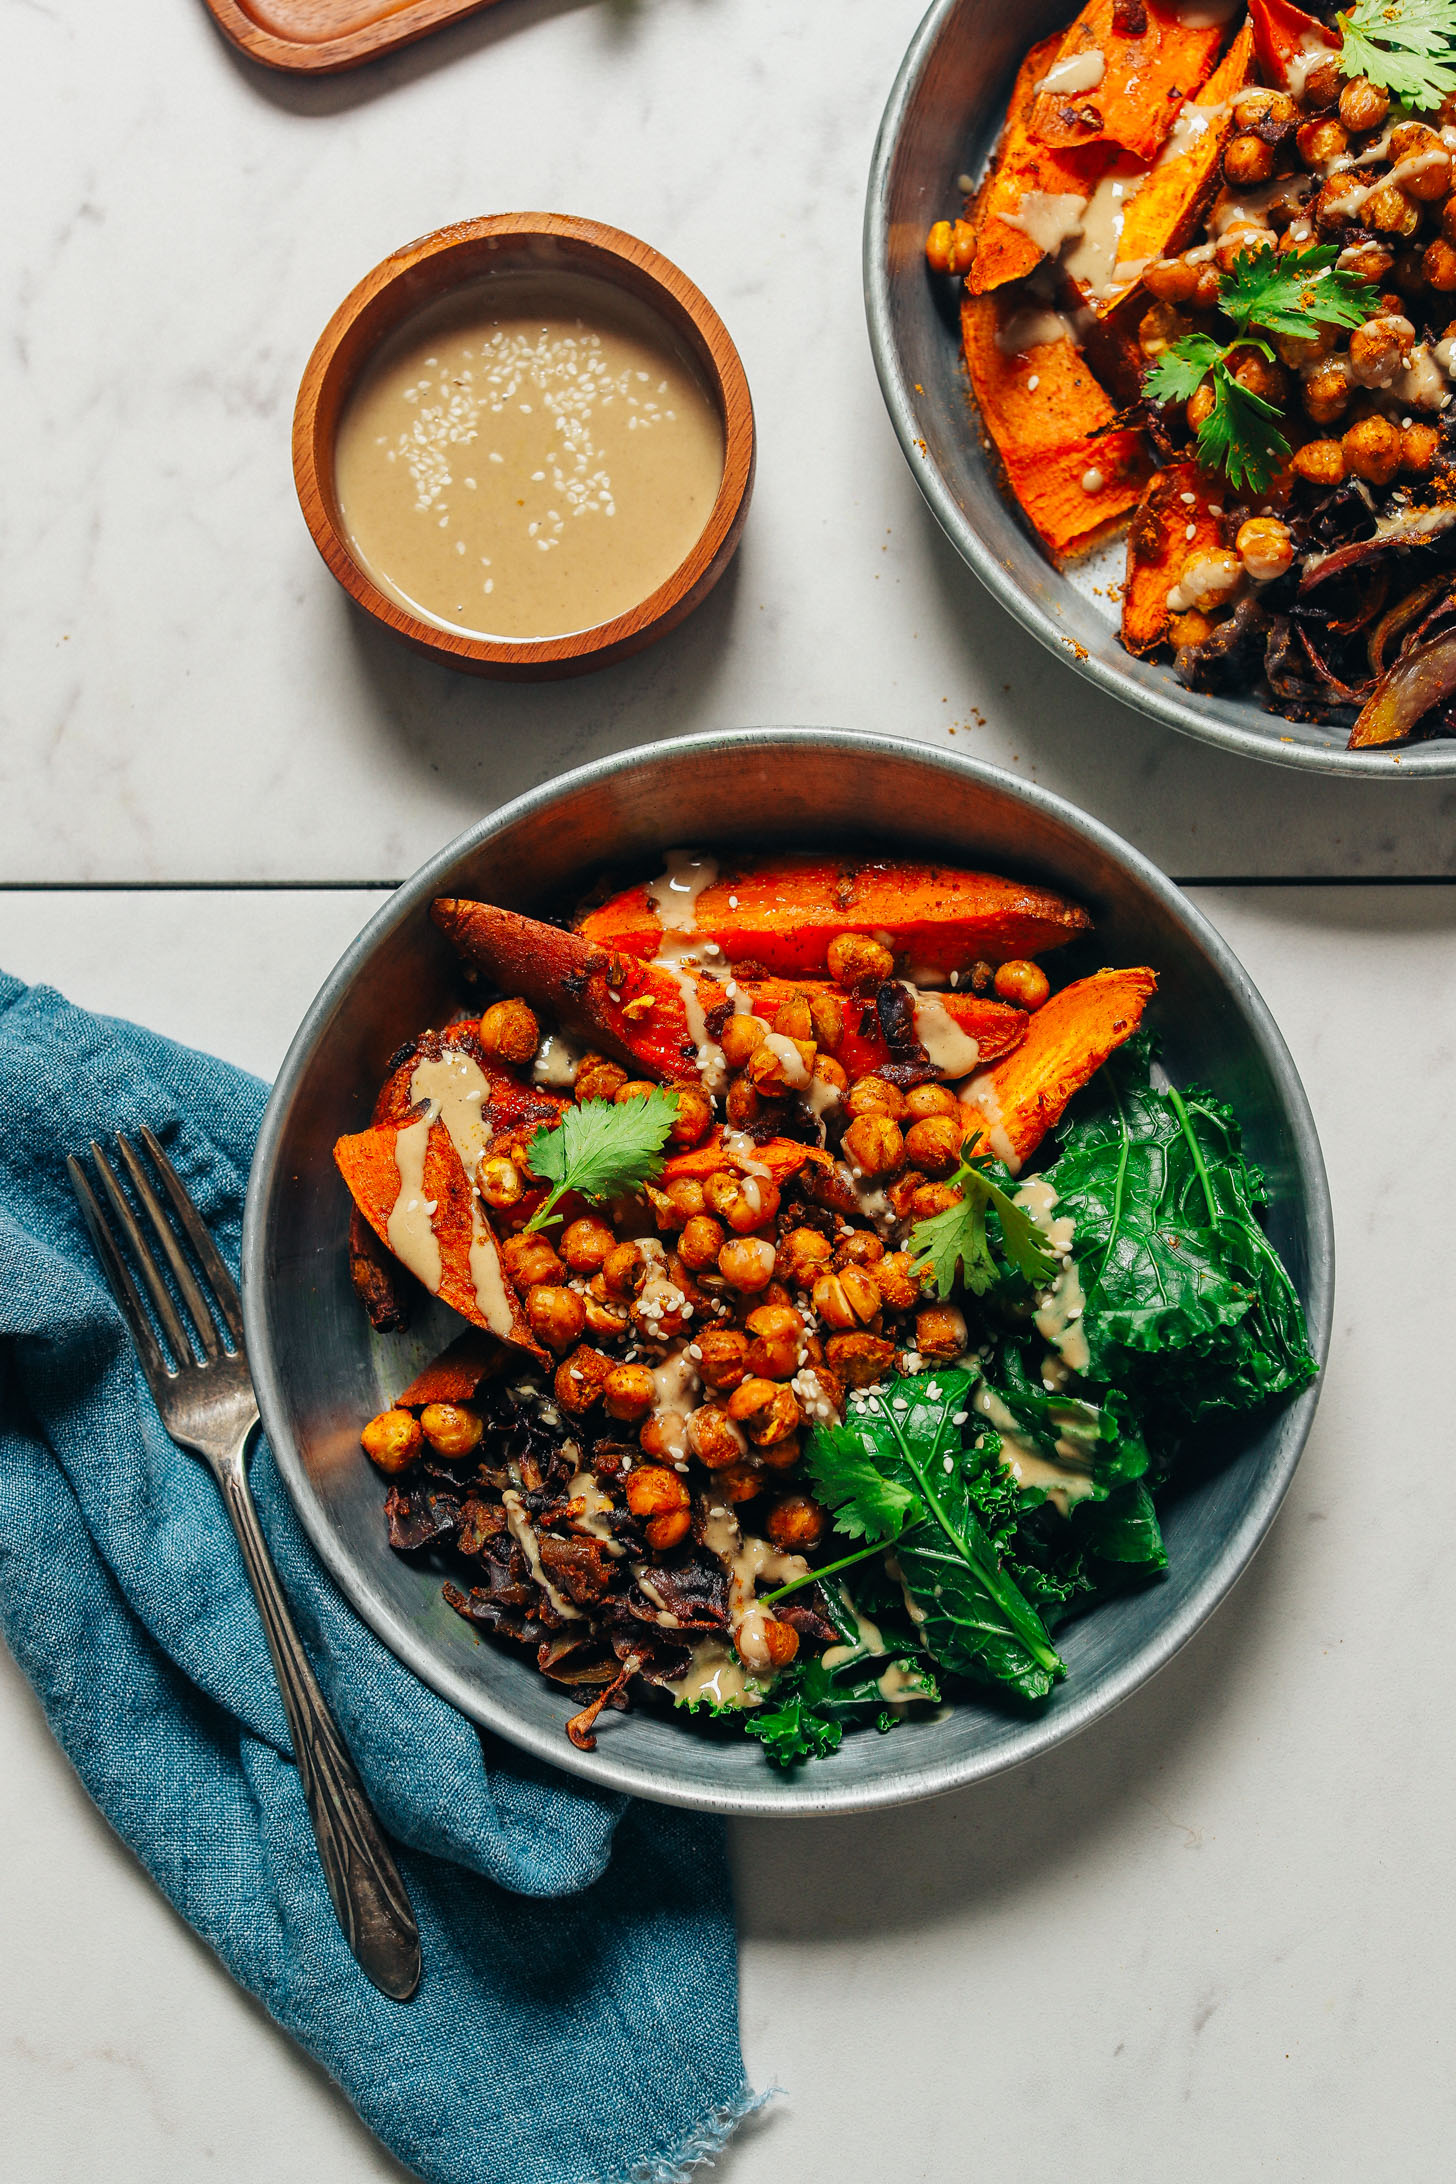 Bowl of tahini sauce beside bowls of our Sweet Potato Sheet Pan Dinner for a simple and delicious meal